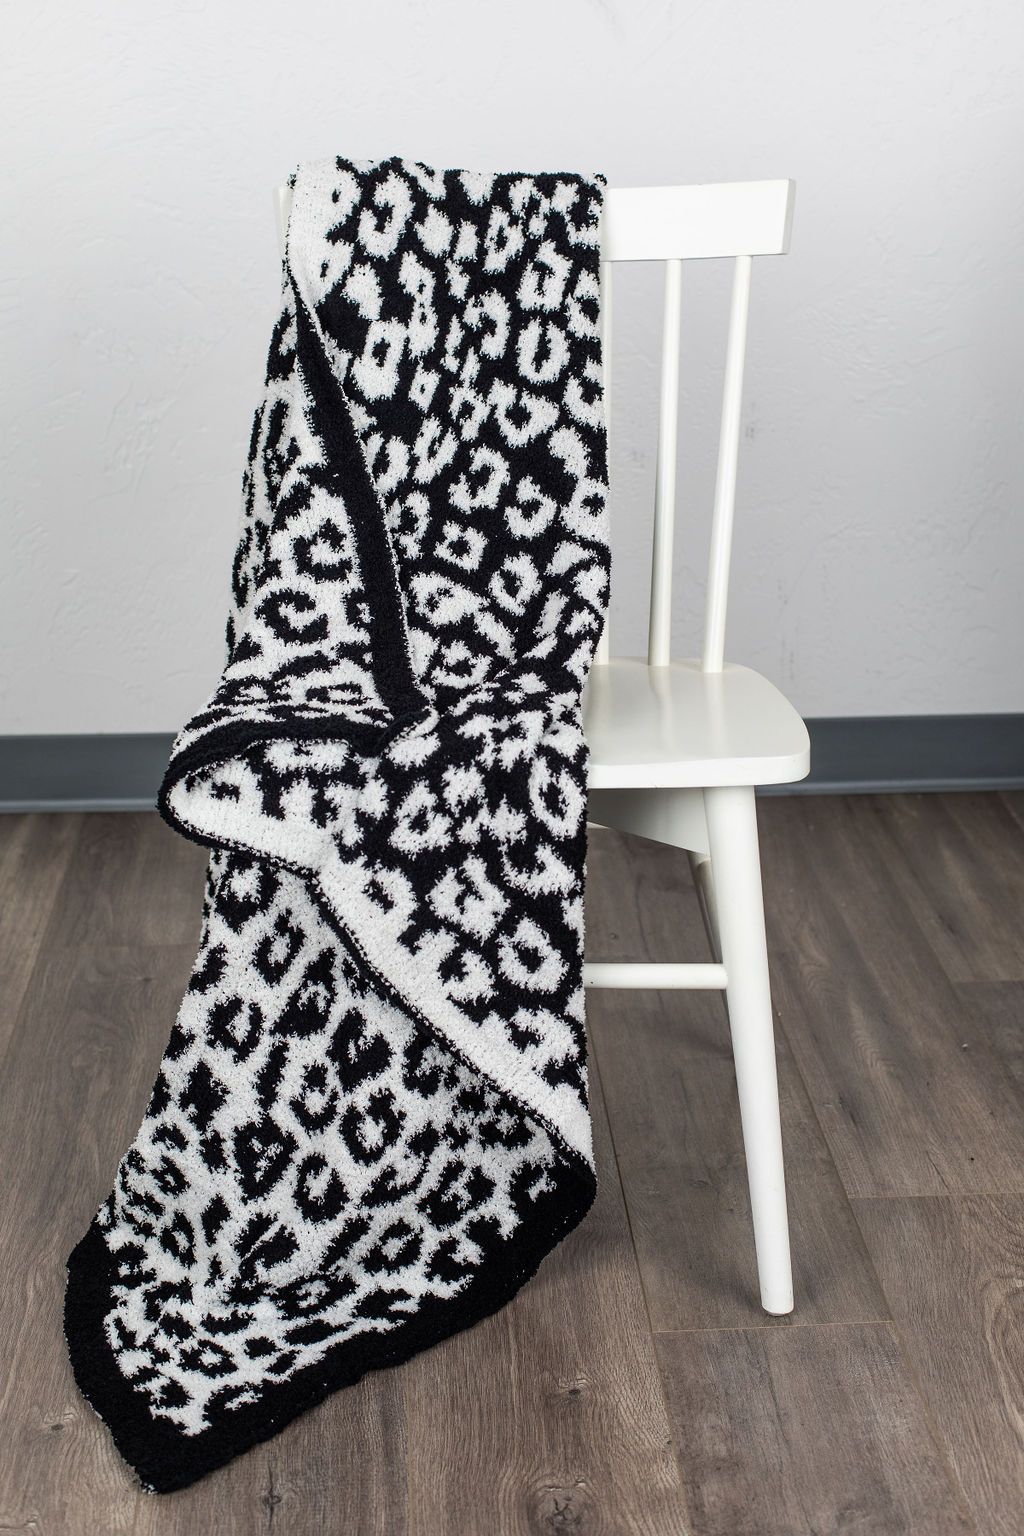 *Plush and Fuzzy Blanket - White with Black Leopard